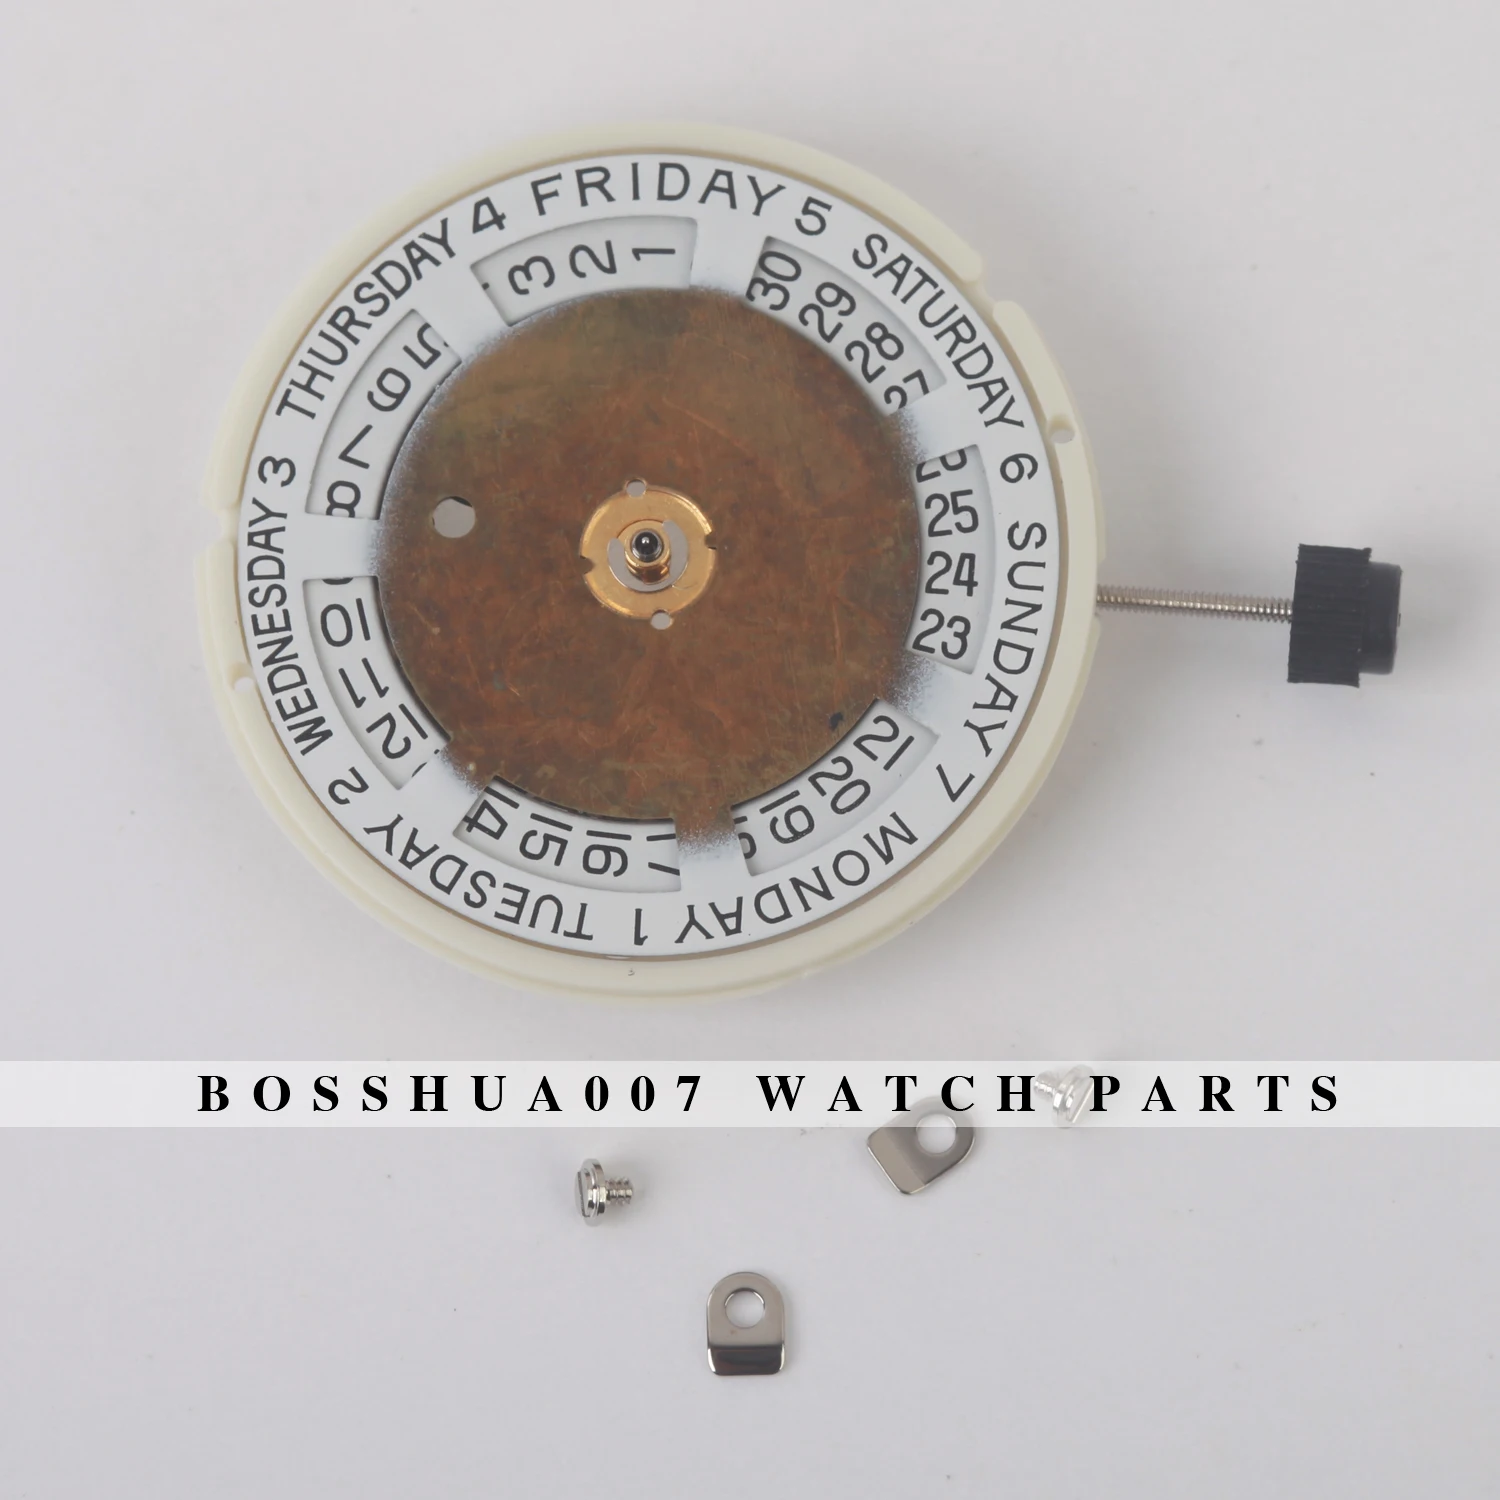 seagull made ST2100 Movement replace eta 2834 movement day date function enlarge